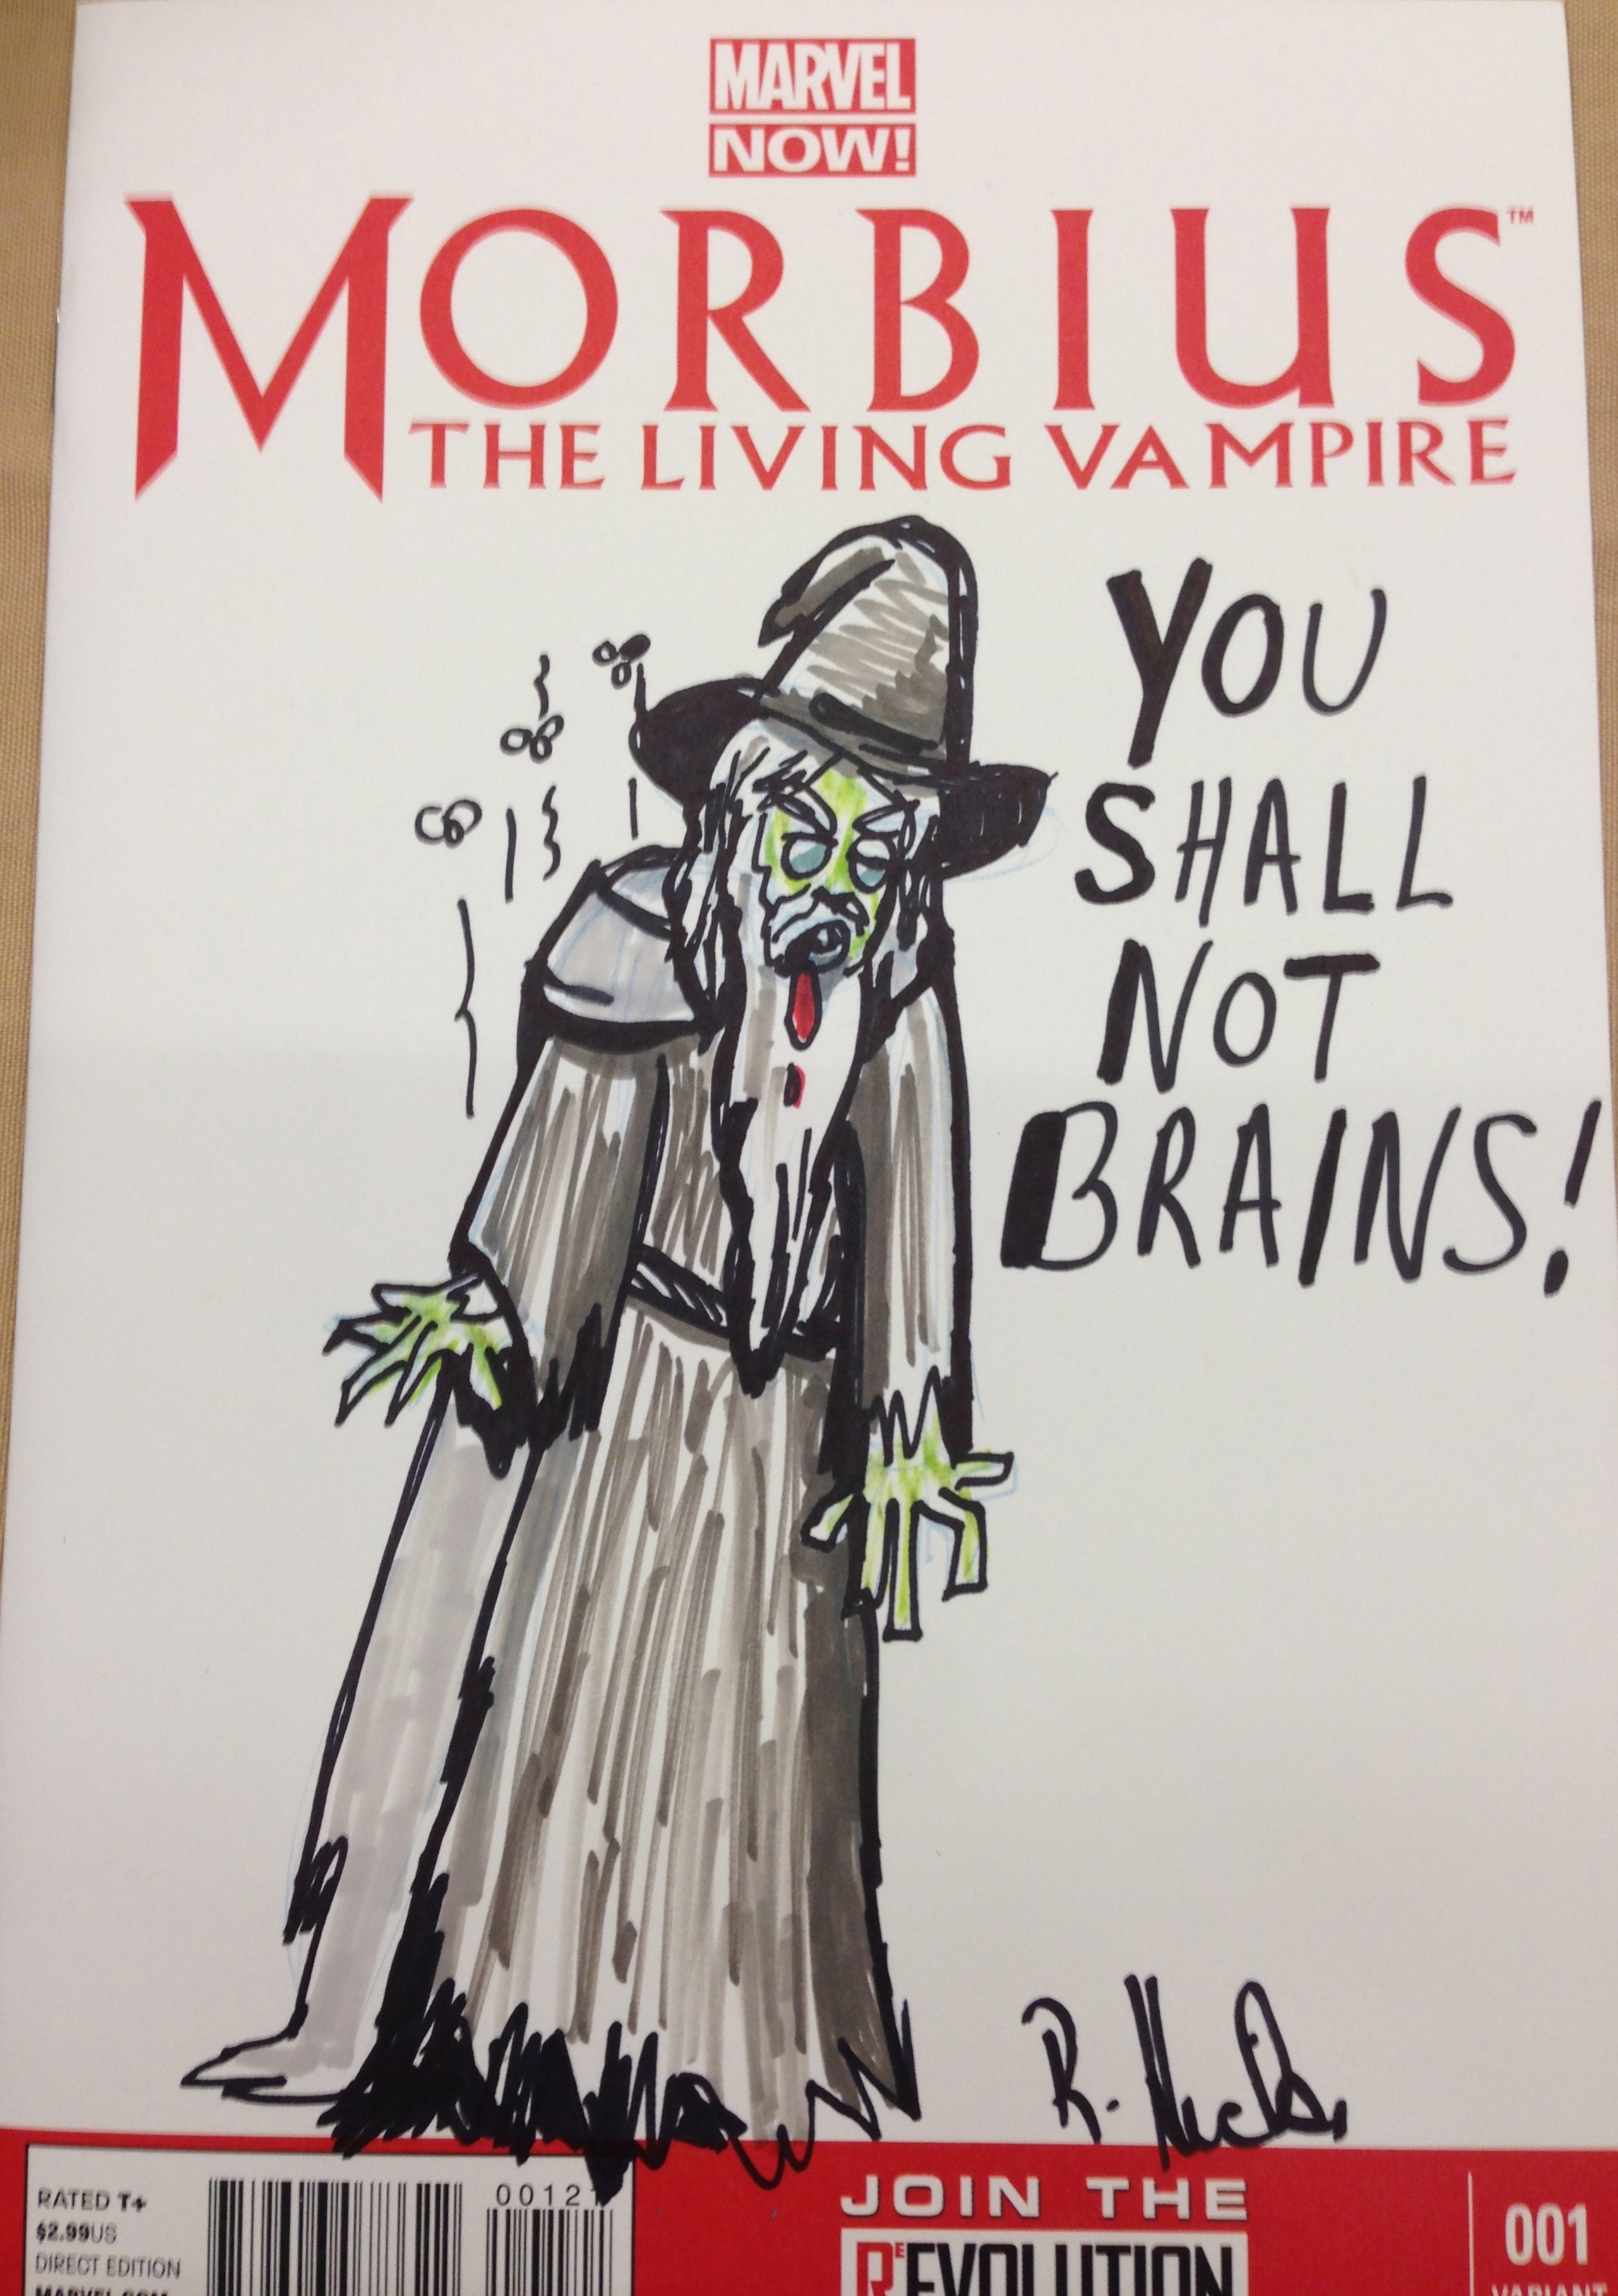 Photo of a sketch by Rebecca Hicks of zombie Gandalf saying “YOU SHALL NOT BRAINS!” Sharpie on a Morbius the Living Vampire sketch cover.